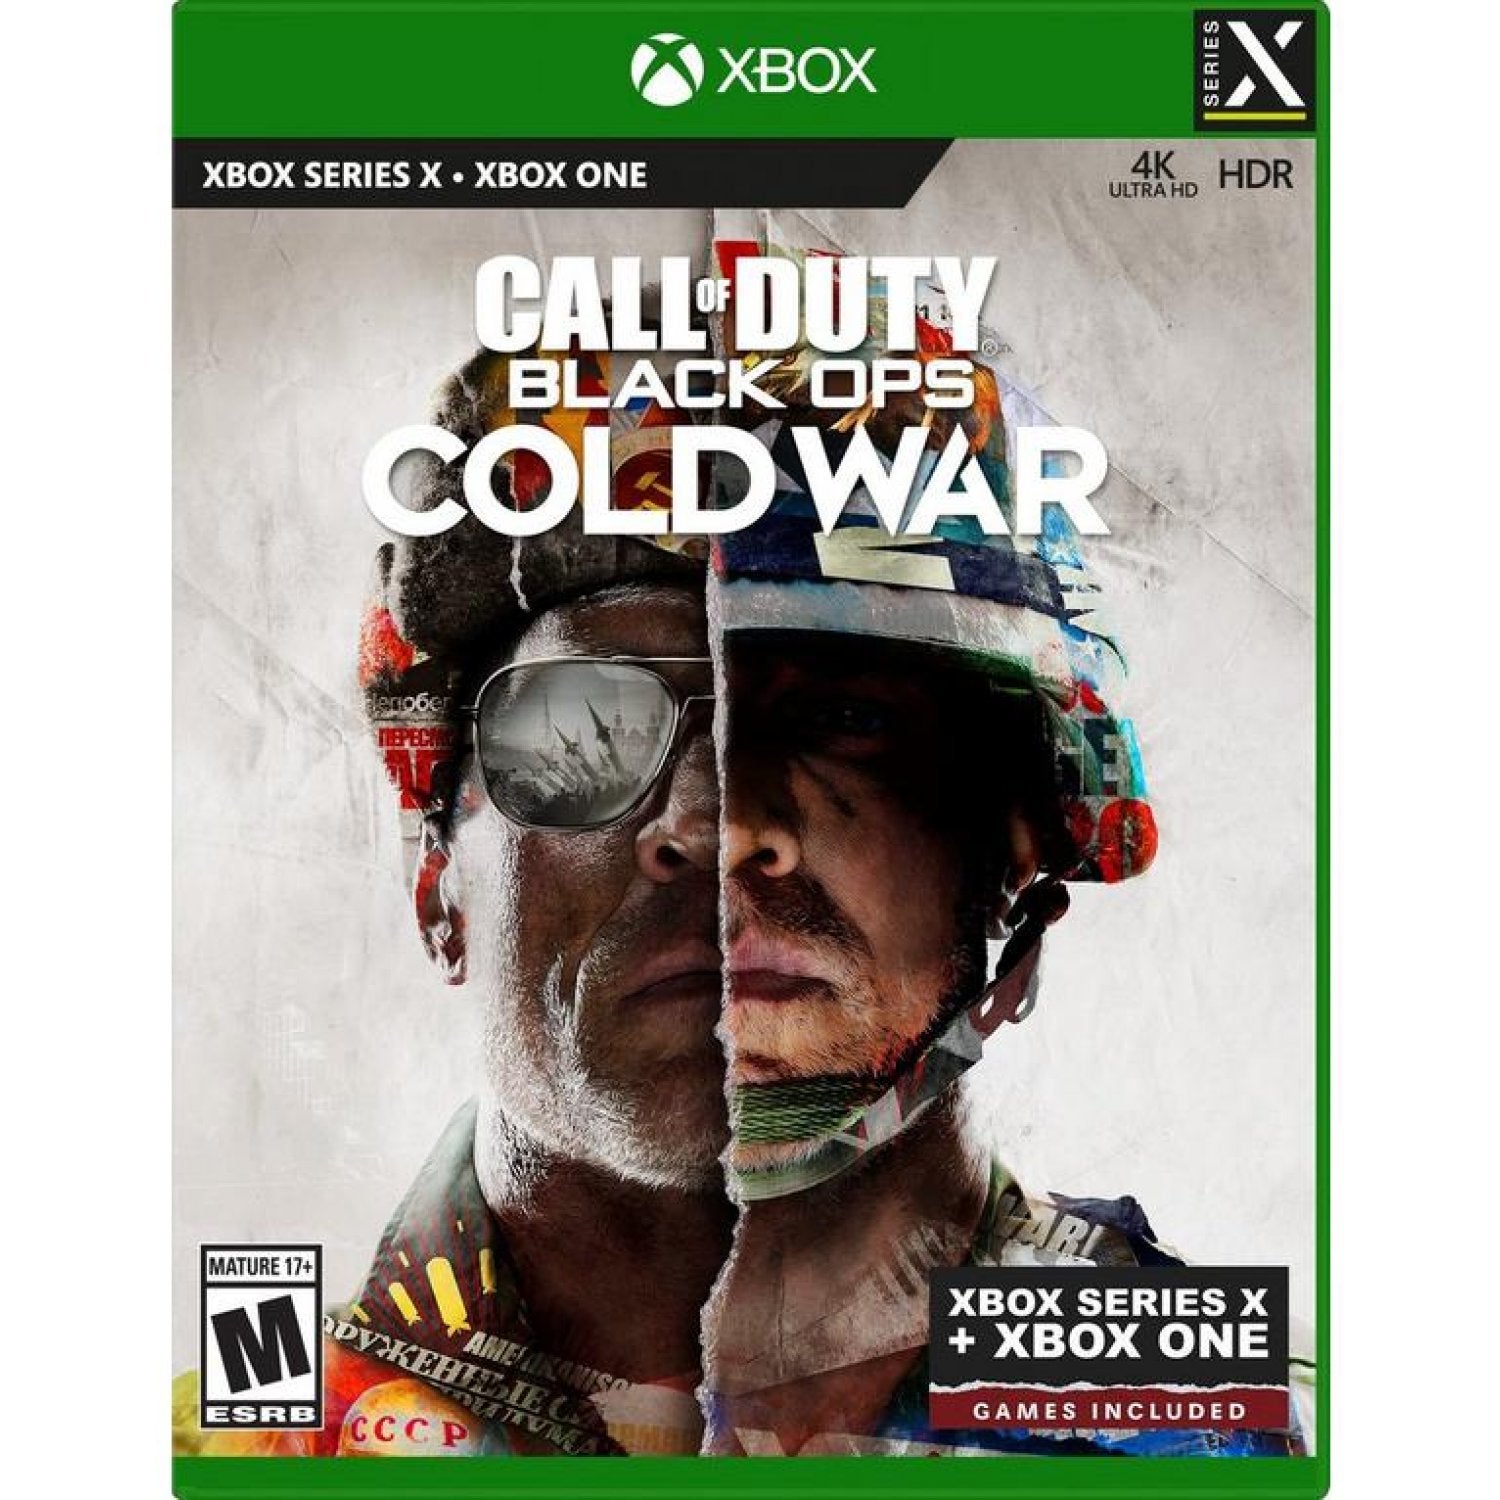 XSX Call of Duty: Black Ops - Cold War